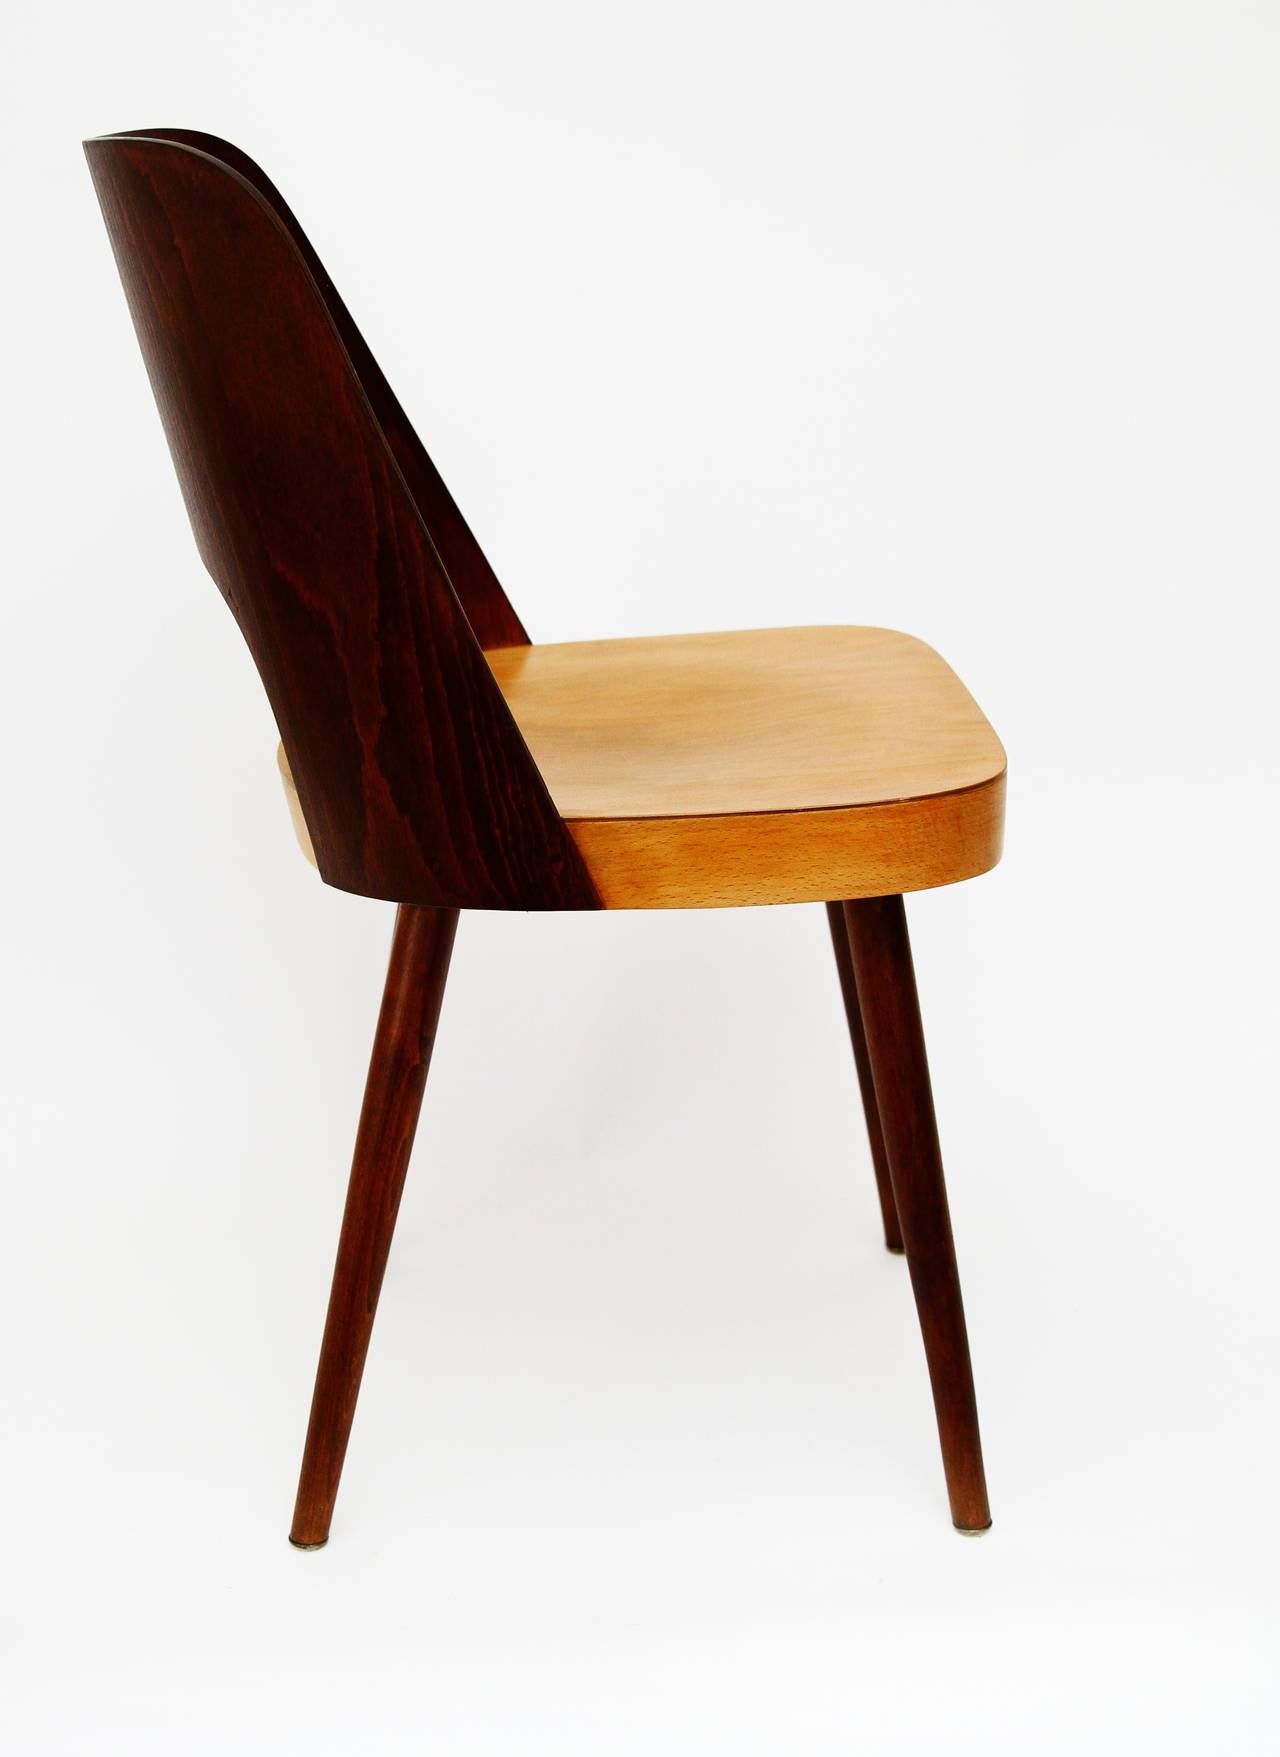 Mid-Century Modern Viennese Bicolored Chair in Beech by Oswald Haerdtl for Thonet, 1950s